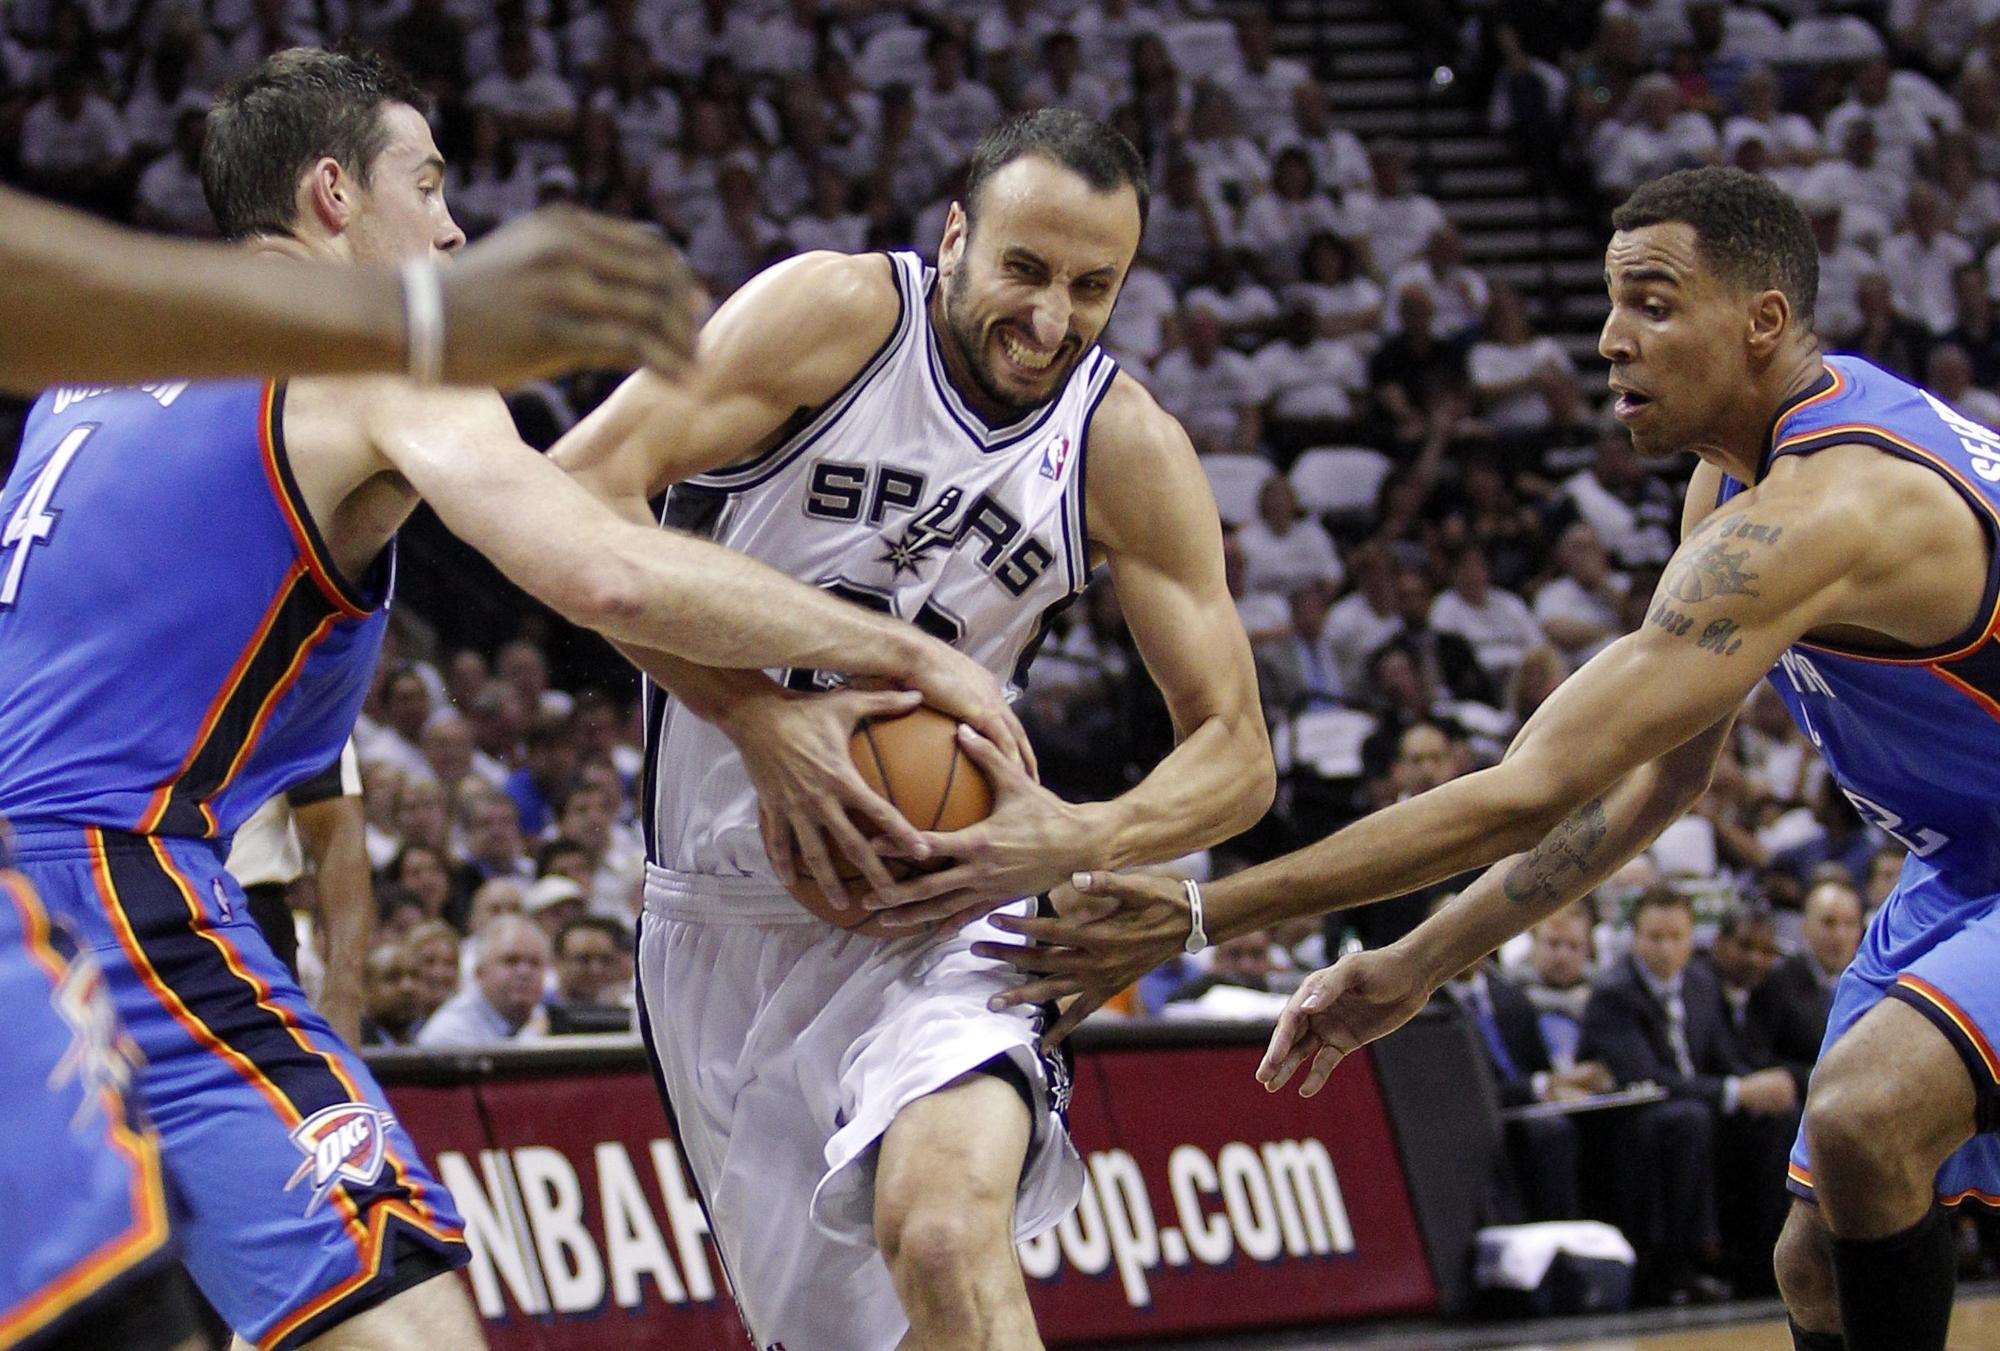 San Antonio Spurs' Ginobili goes to the basket against Oklahoma City Thunder's Collison and Sefolosha in the first half during Game 5 of the NBA Western Conference basketball finals in San Antonio [REUTERS - Tim Sharp]